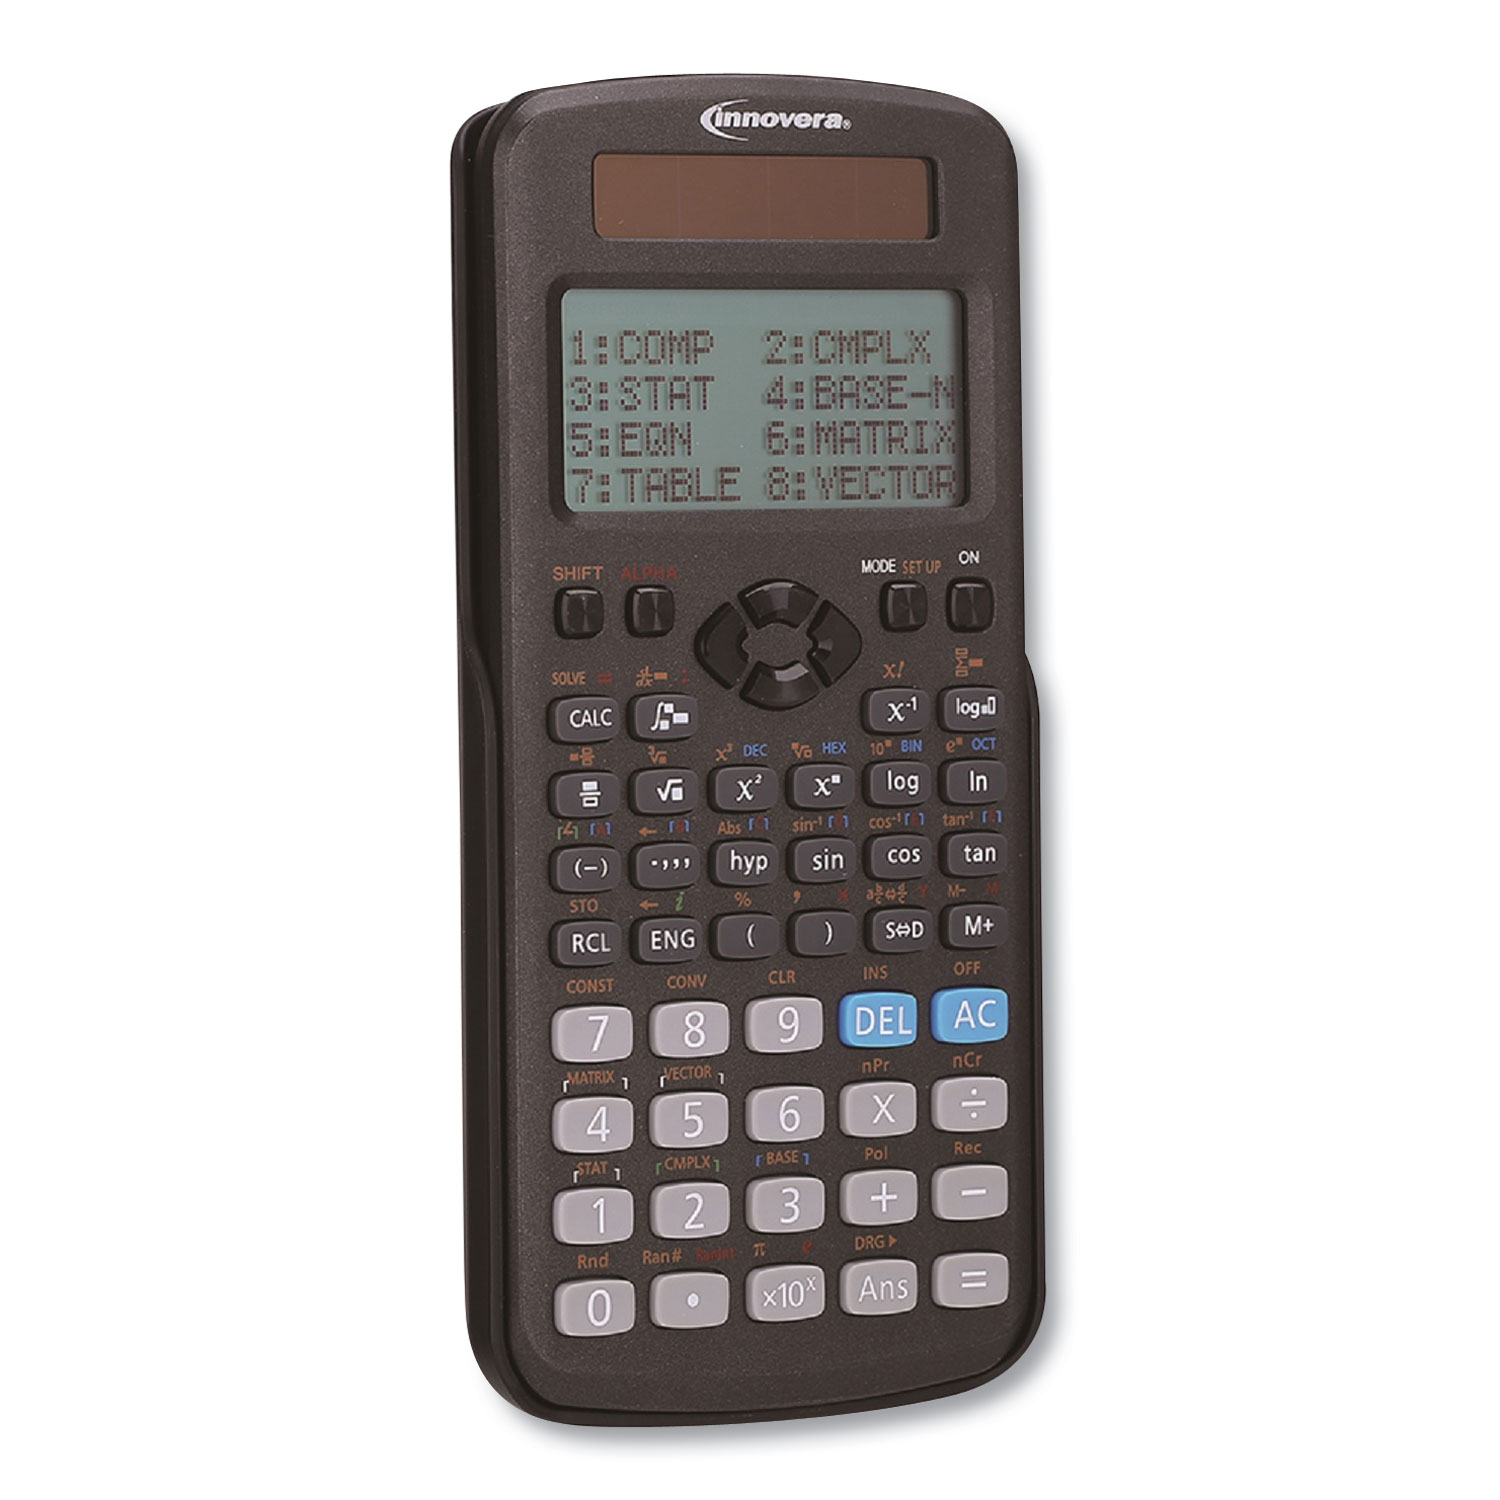  Innovera IVR15970 Advanced Scientific Calculator, 417 Functions, 15-Digit LCD, Four Display Lines (IVR15970) 